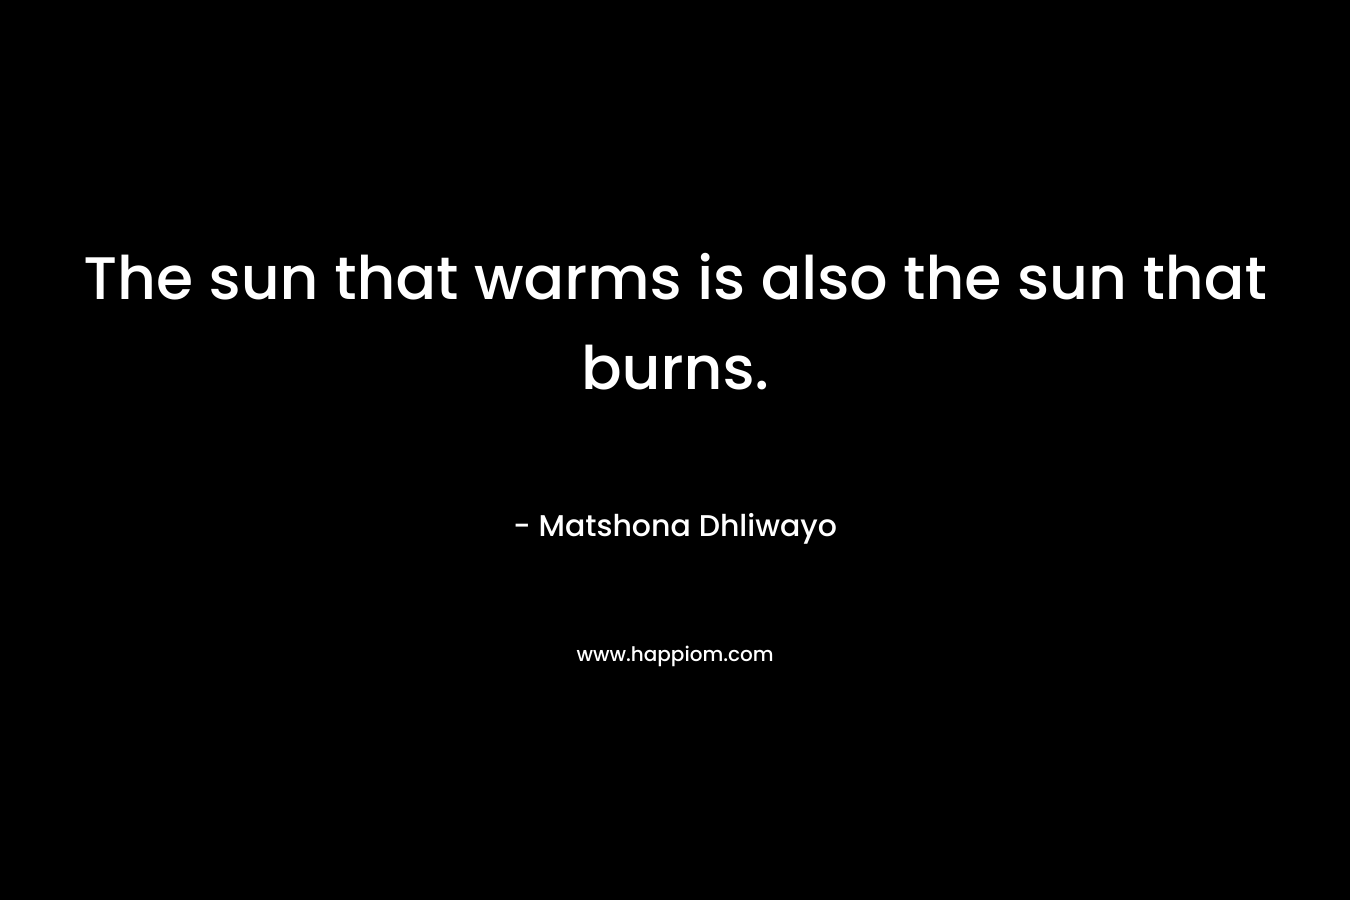 The sun that warms is also the sun that burns.